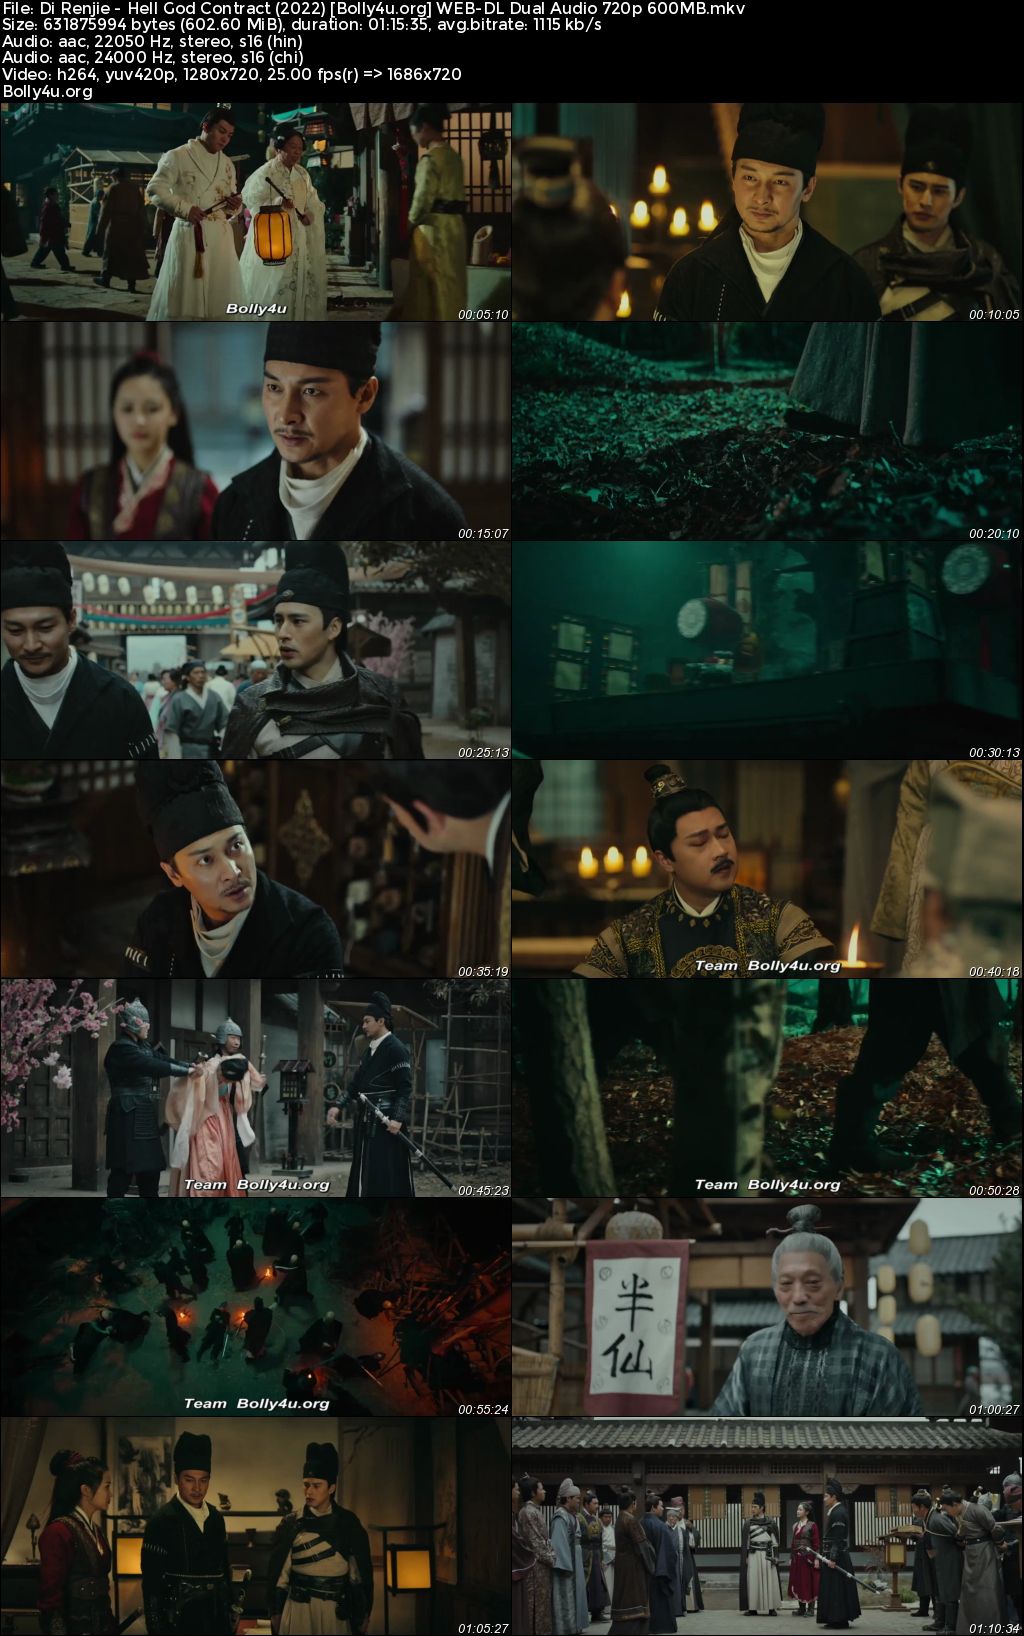 Di Renjie Hell God Contract 2022 WEB-DL Hindi Dual Audio Full Movie Download 1080p 720p 480p